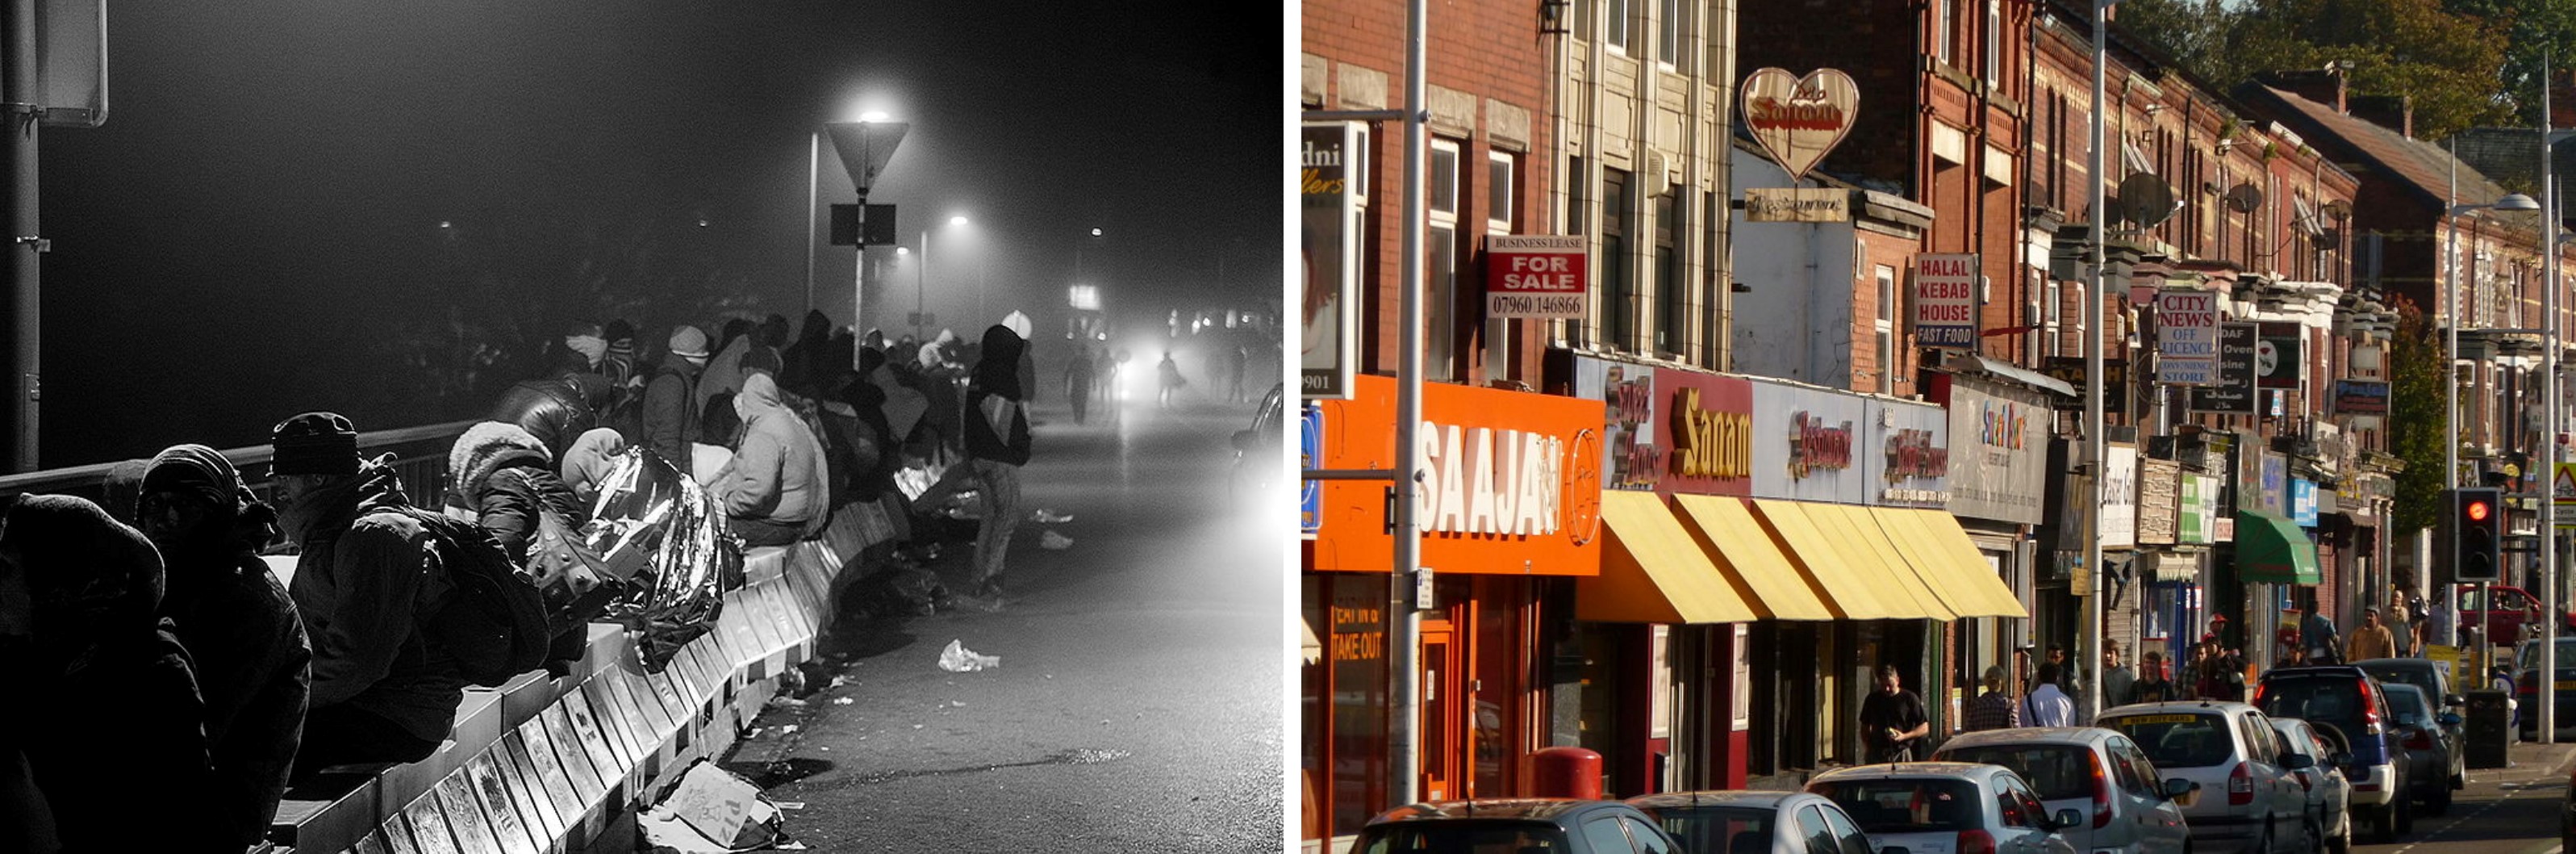 On the left, migrants waiting to enter Germany. On the right, Pakistani shops and restaurants on Wilmslow Road in Manchester, England.